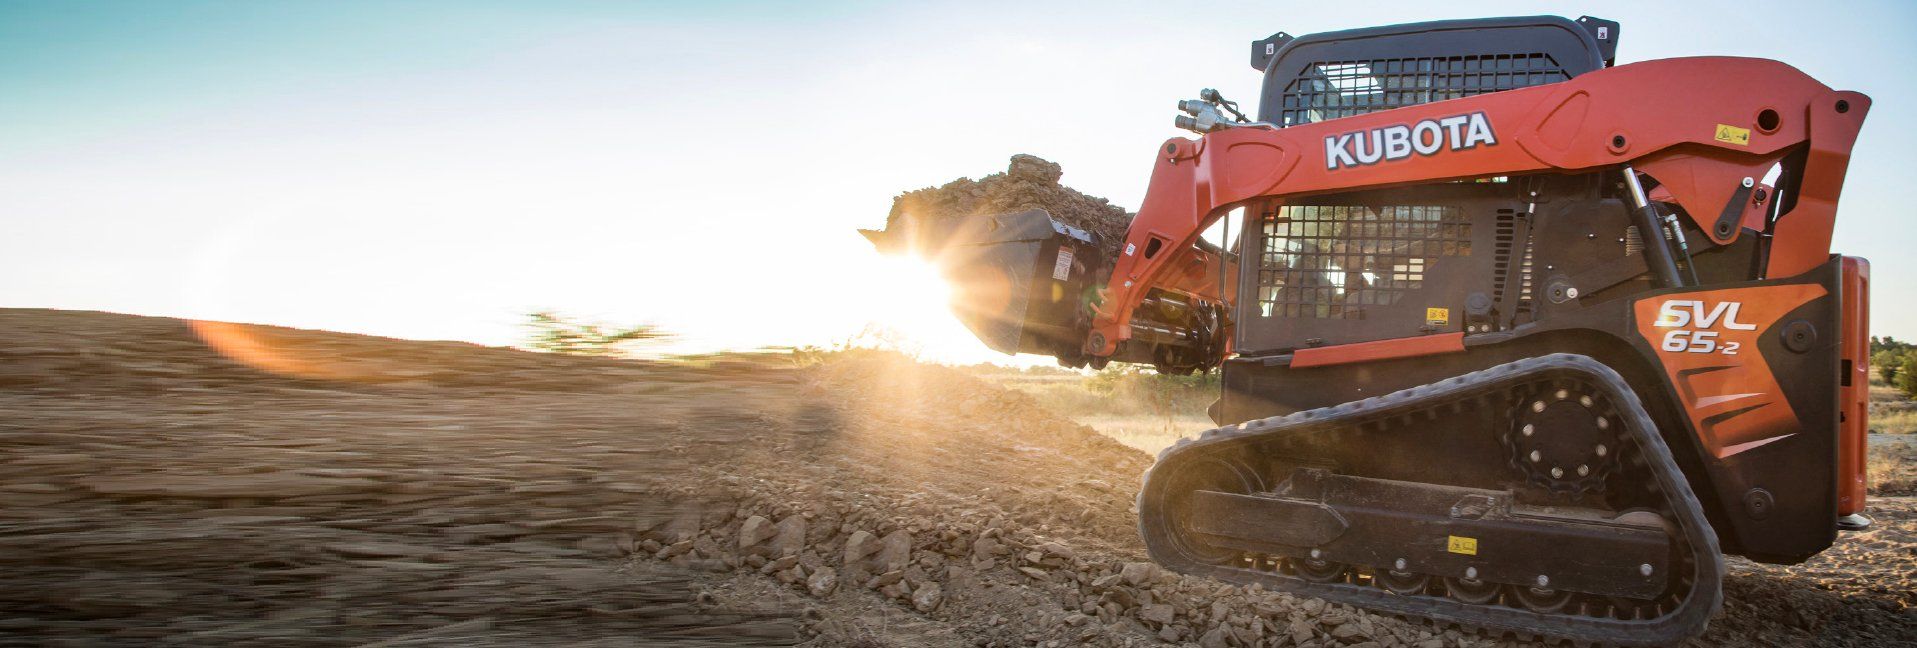 Skid steer loaders do more around your acreage